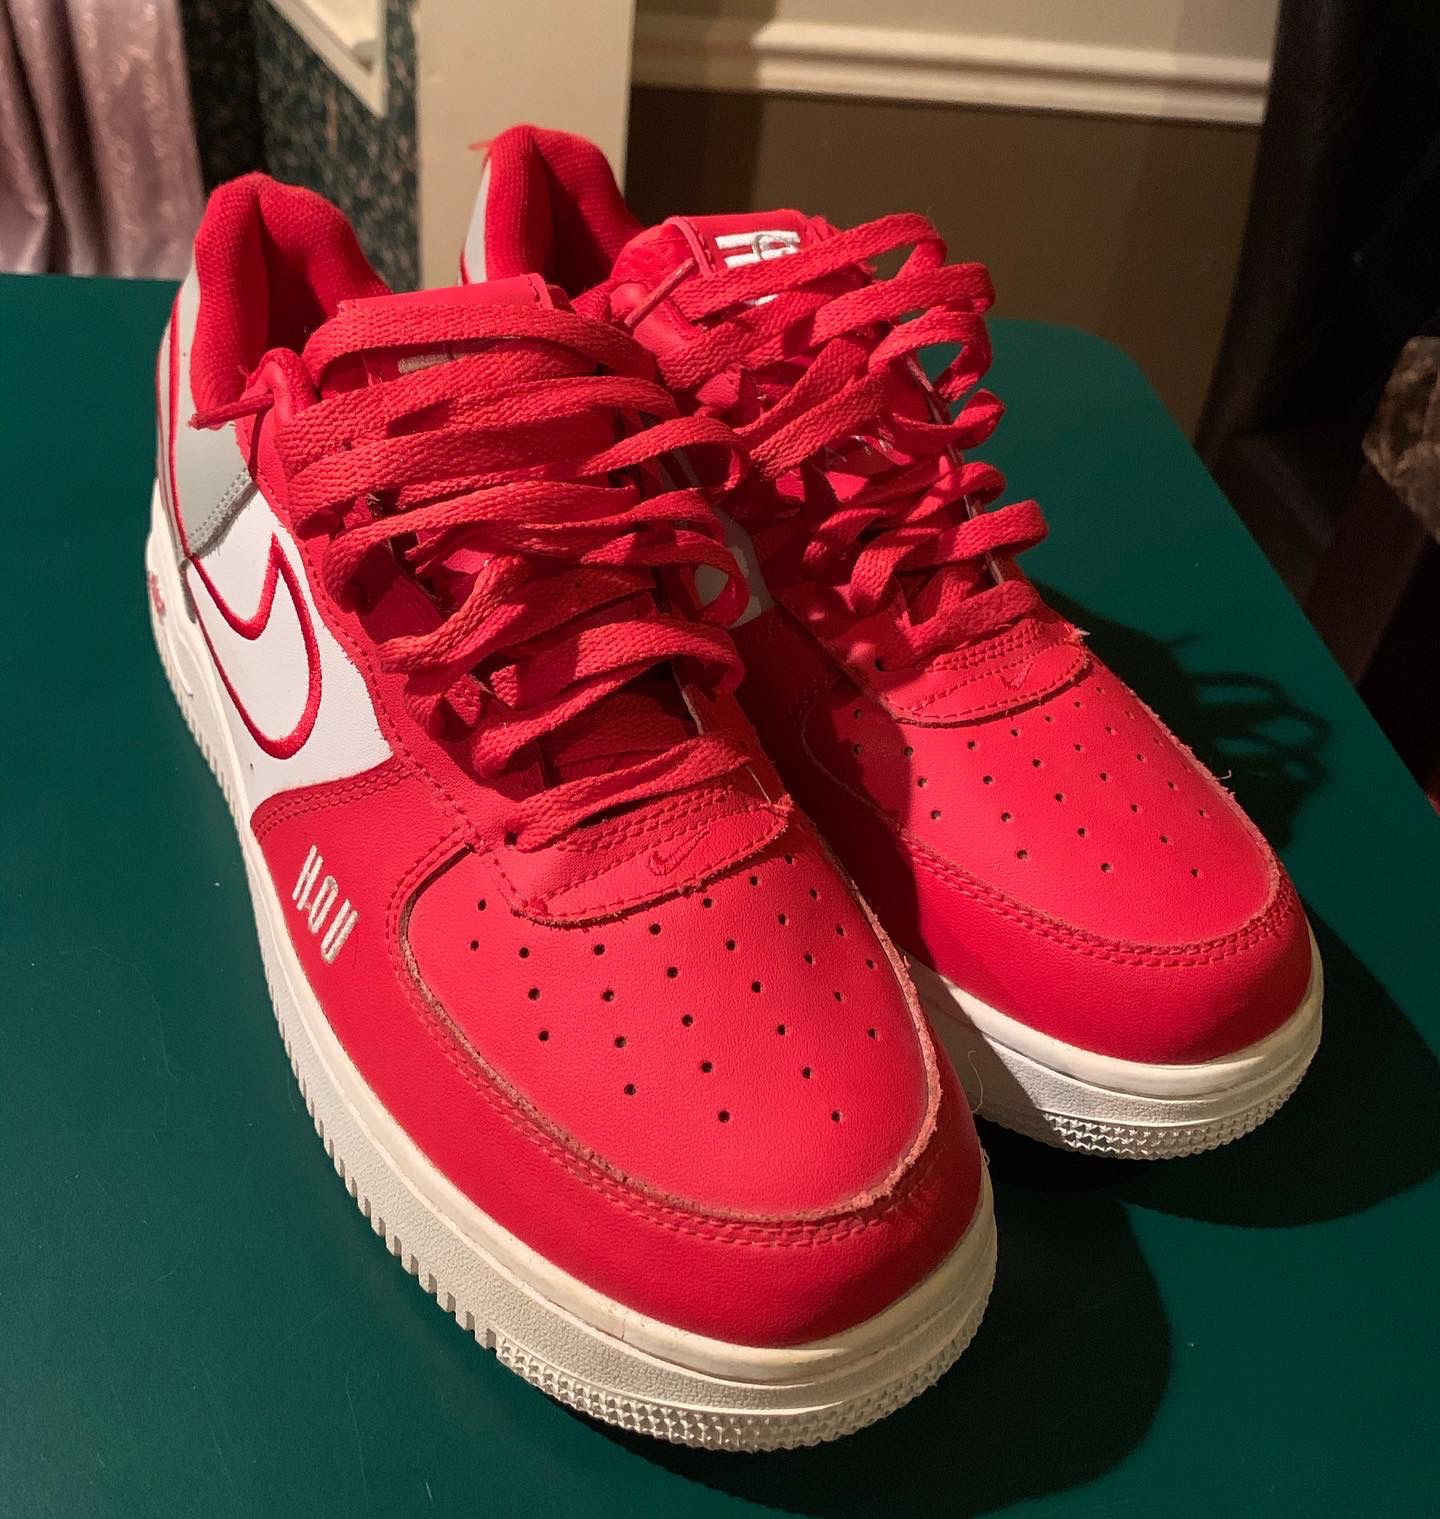 Nike Air Force 1 “HOUSTON ROCKETS” size 10